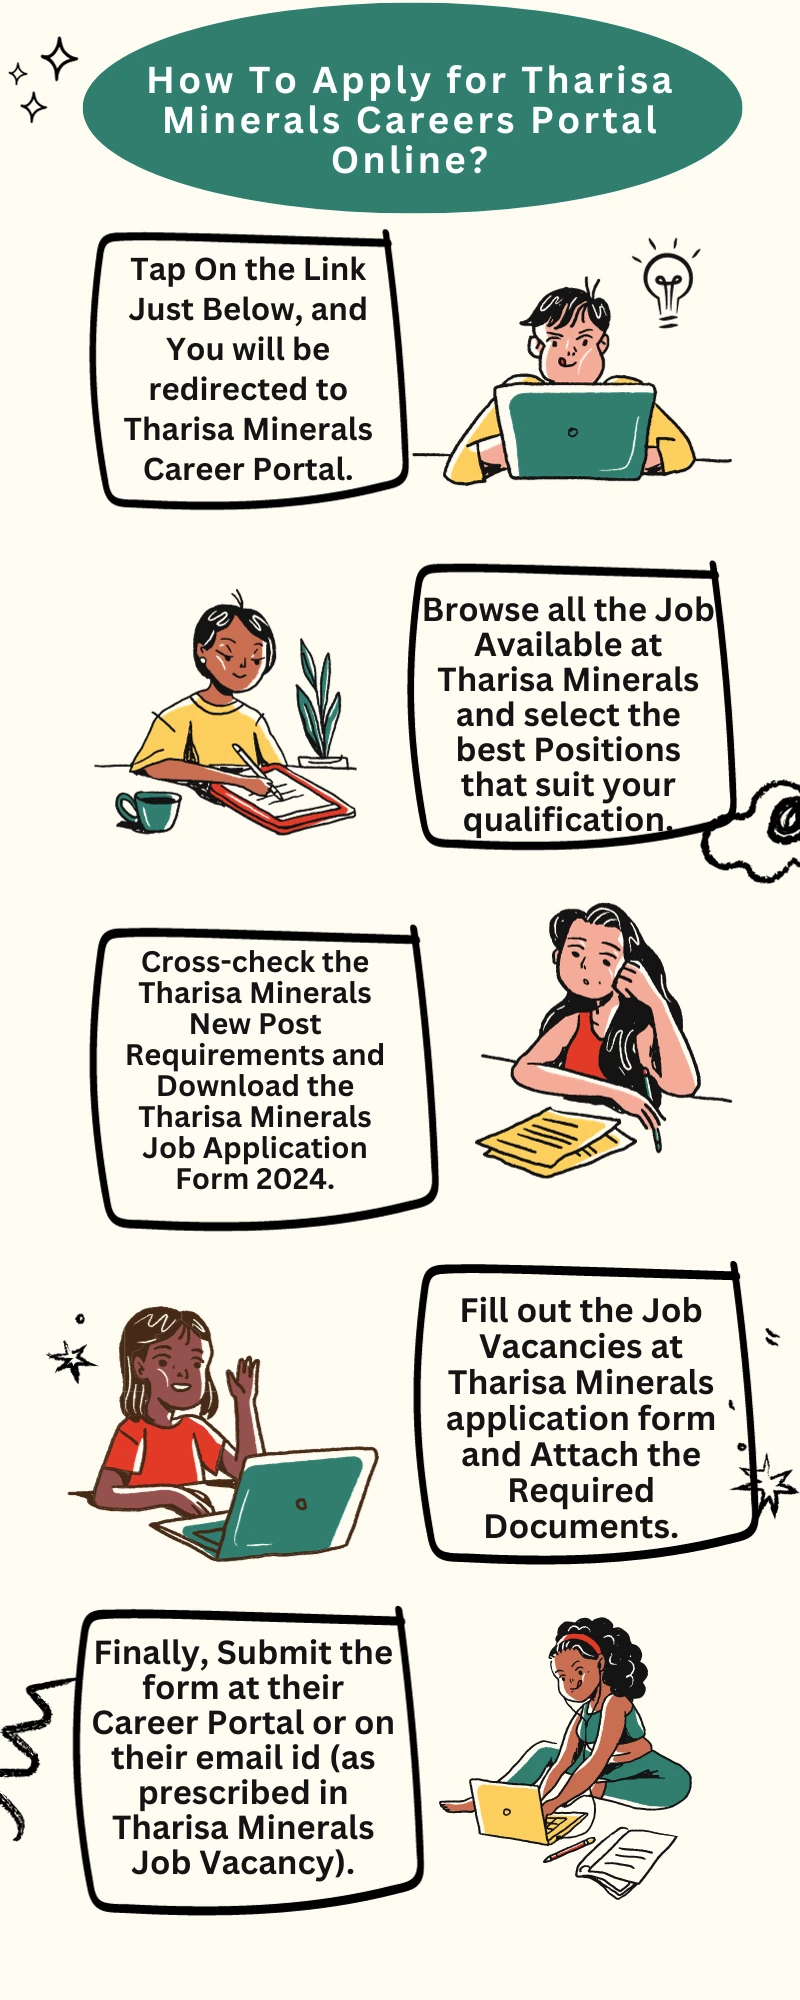 How To Apply for Tharisa Minerals Careers Portal Online?